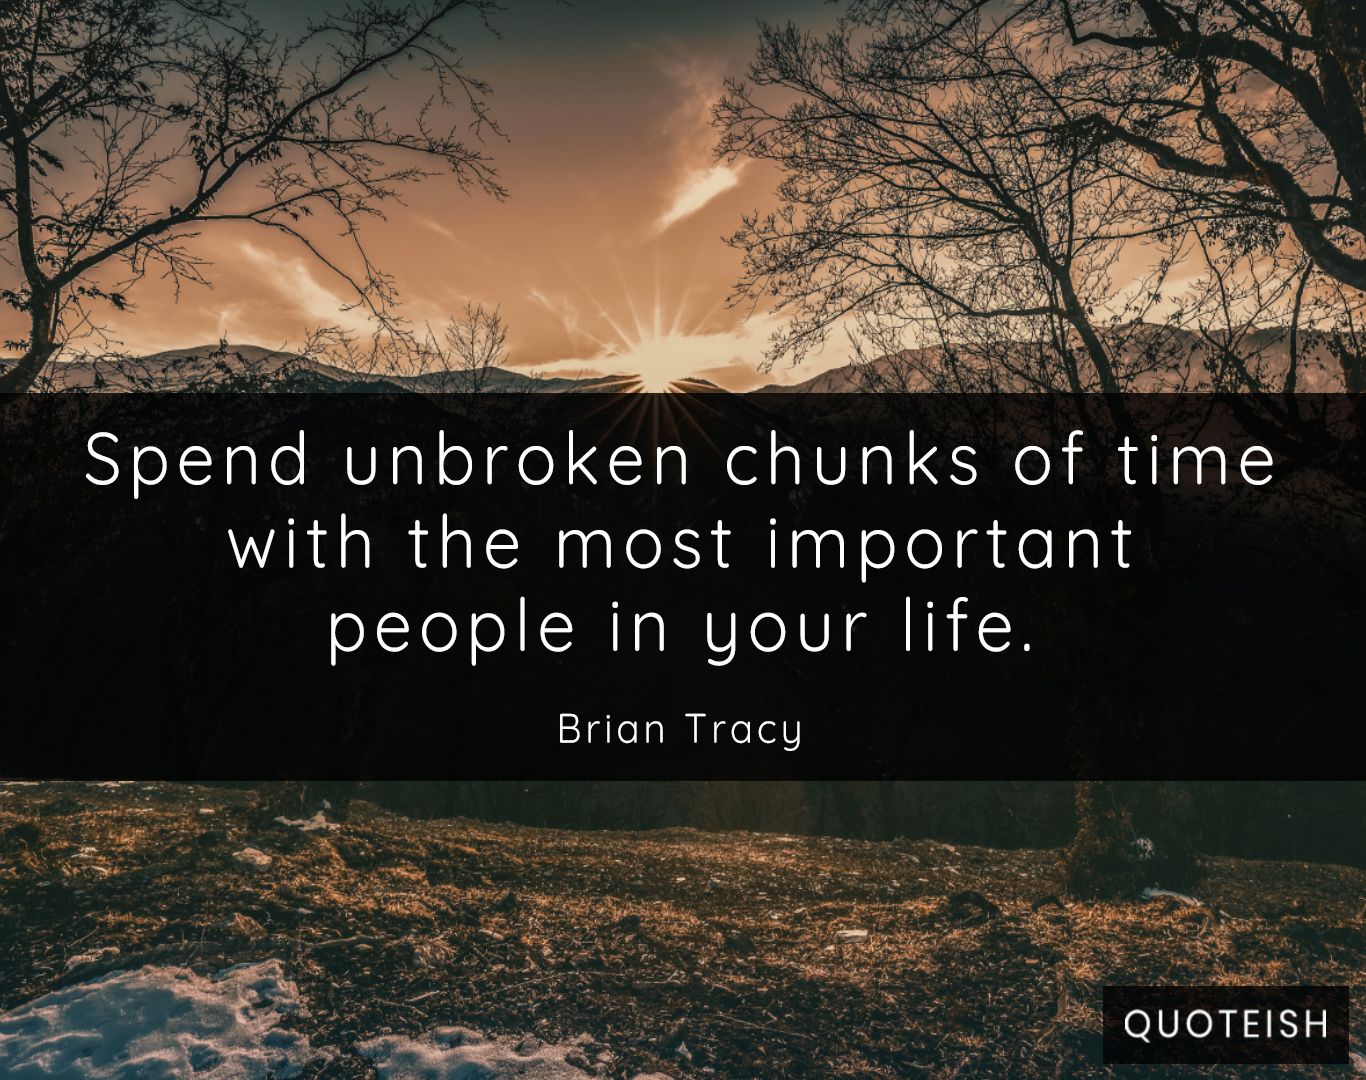 35+ People in Your Life Quotes - QUOTEISH